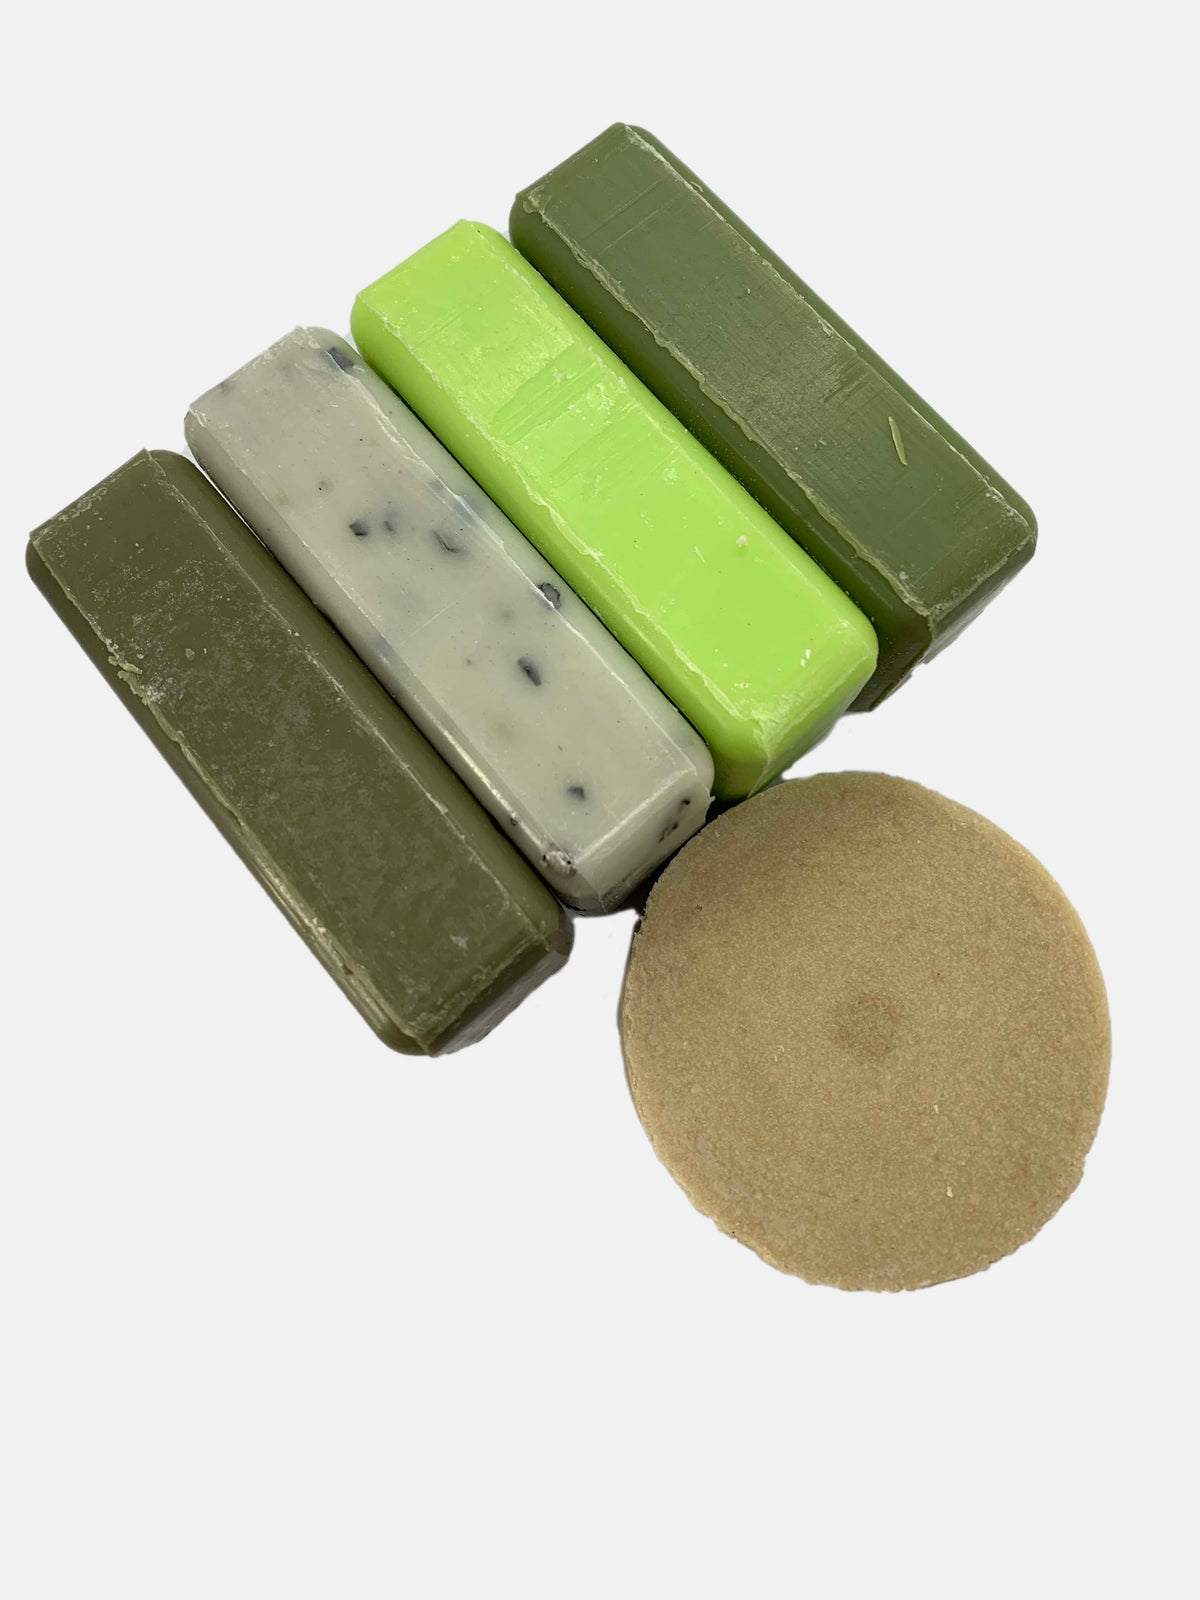 MENS SOAP COLLECTION WITH SHAMPOO BAR